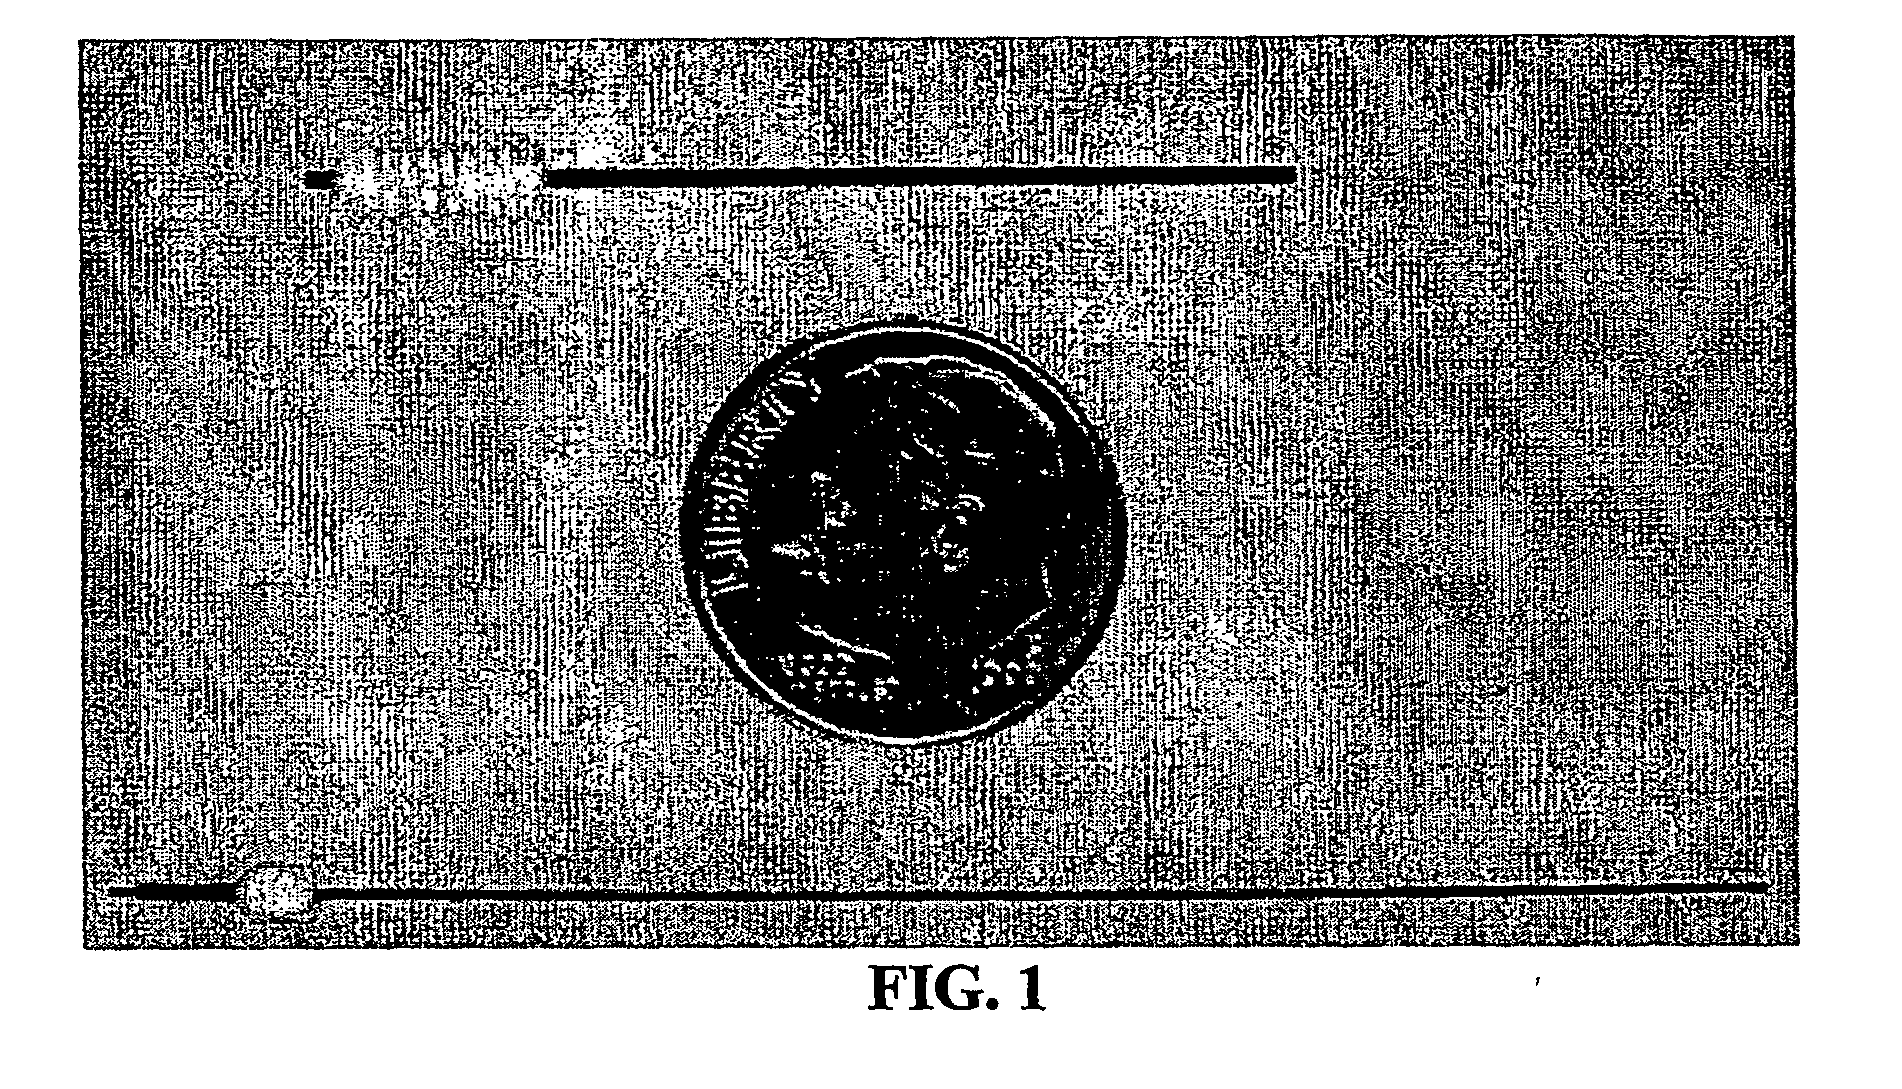 Method for convection enhanced delivery of therapeutic agents